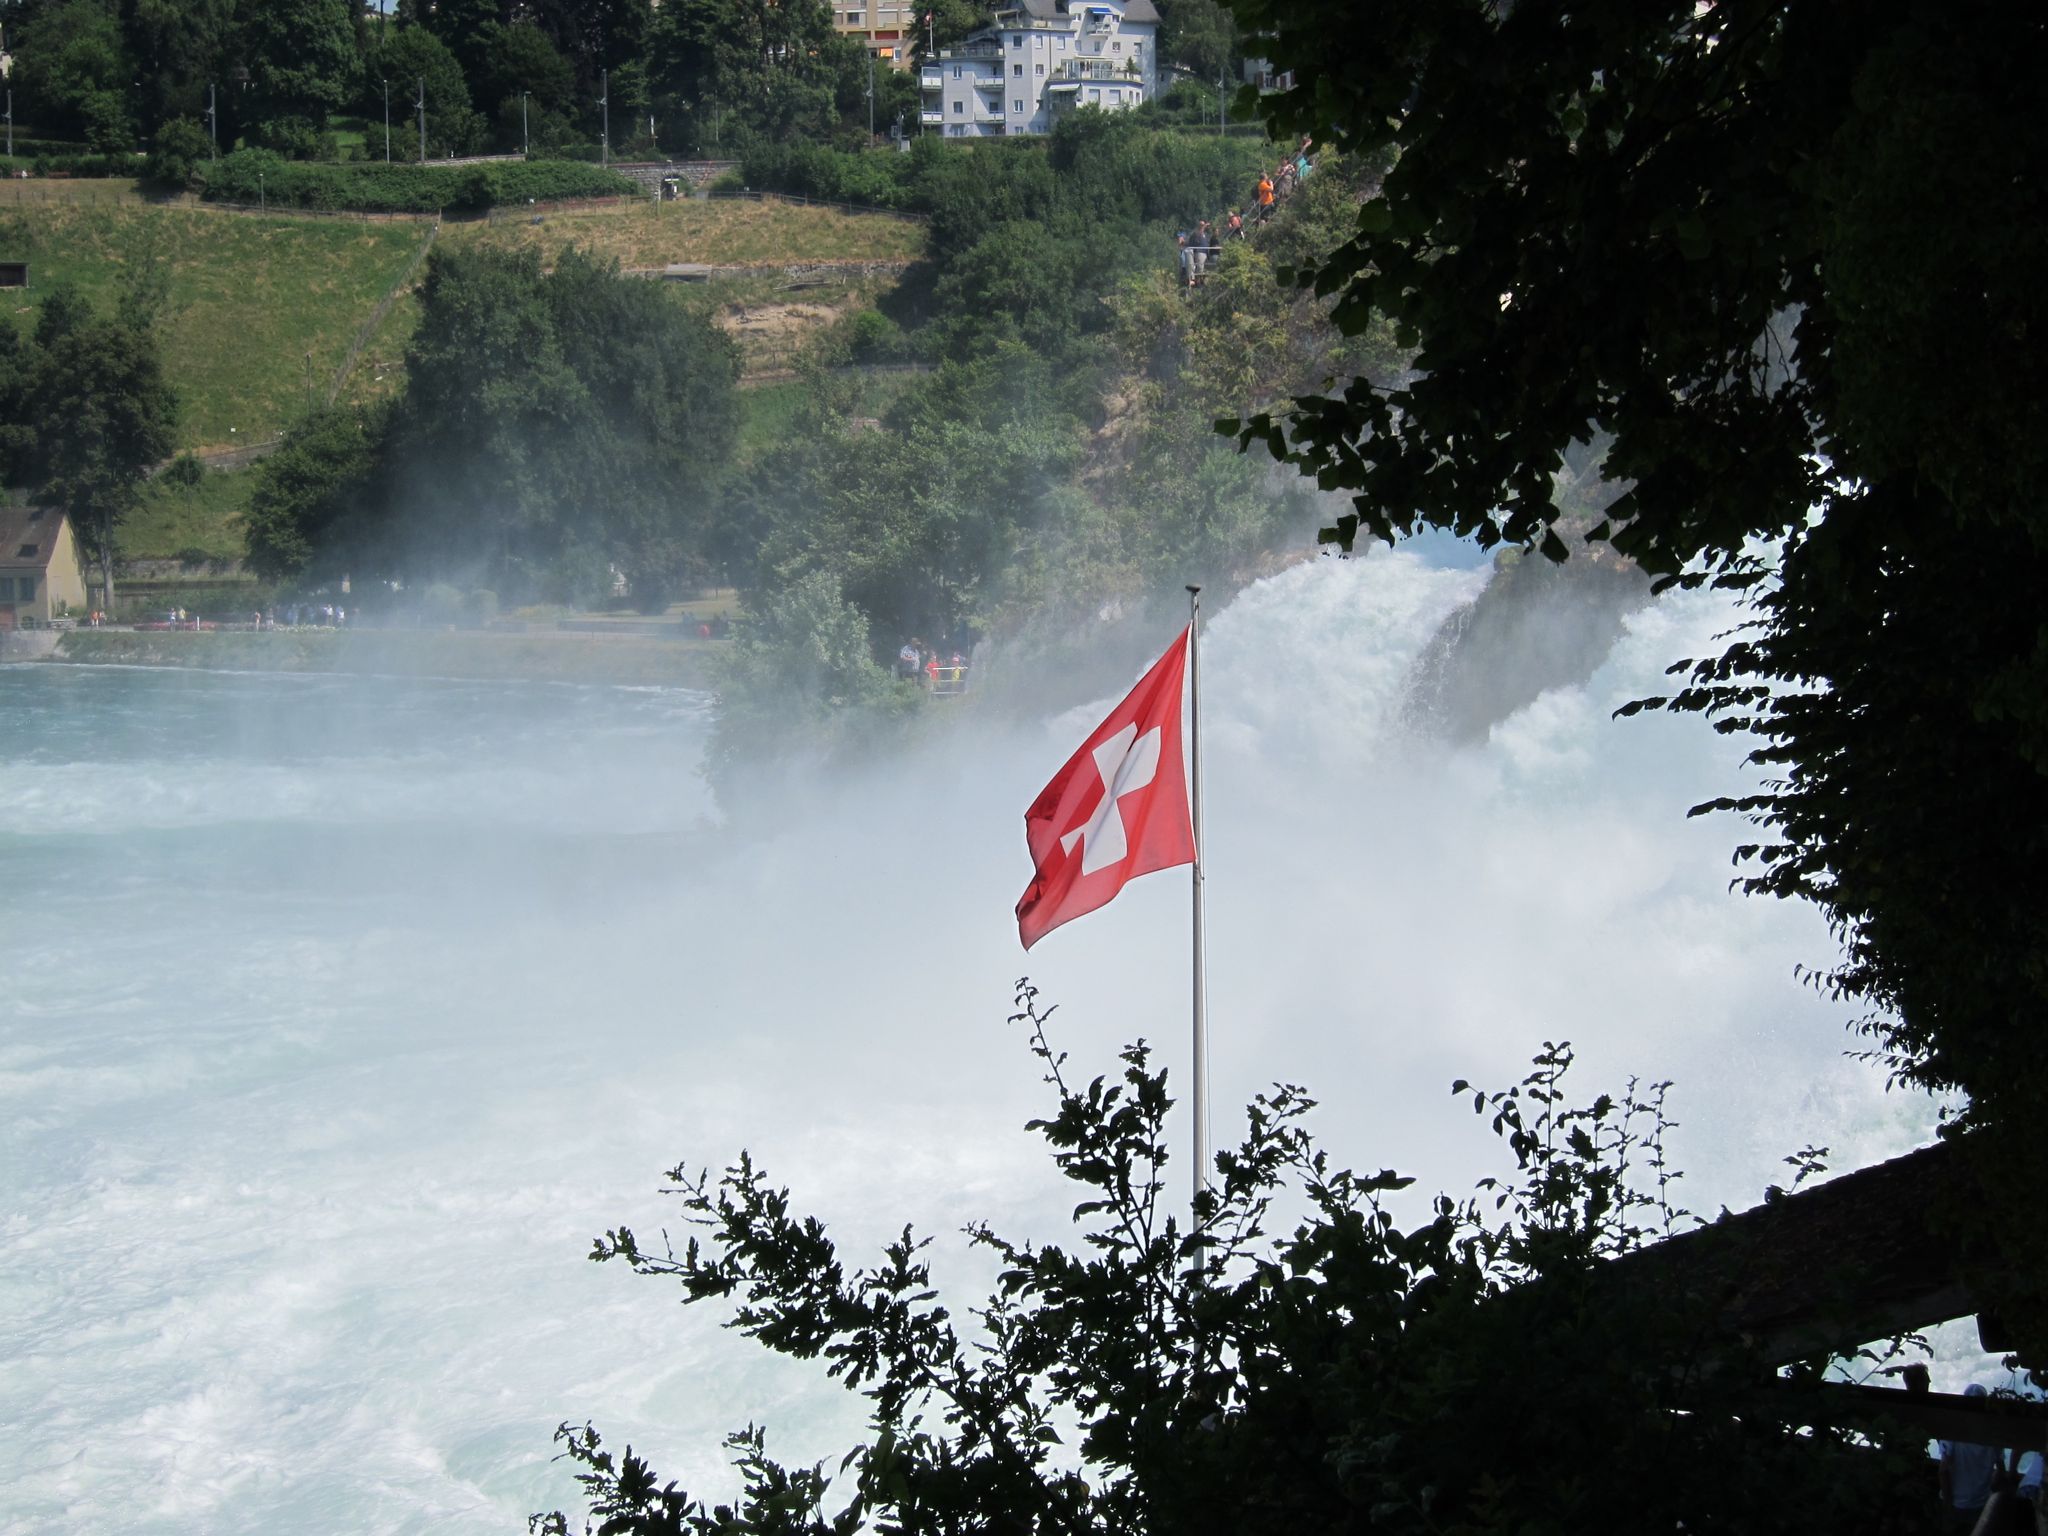 Photo 6 of 22 from the album Rheinfall.